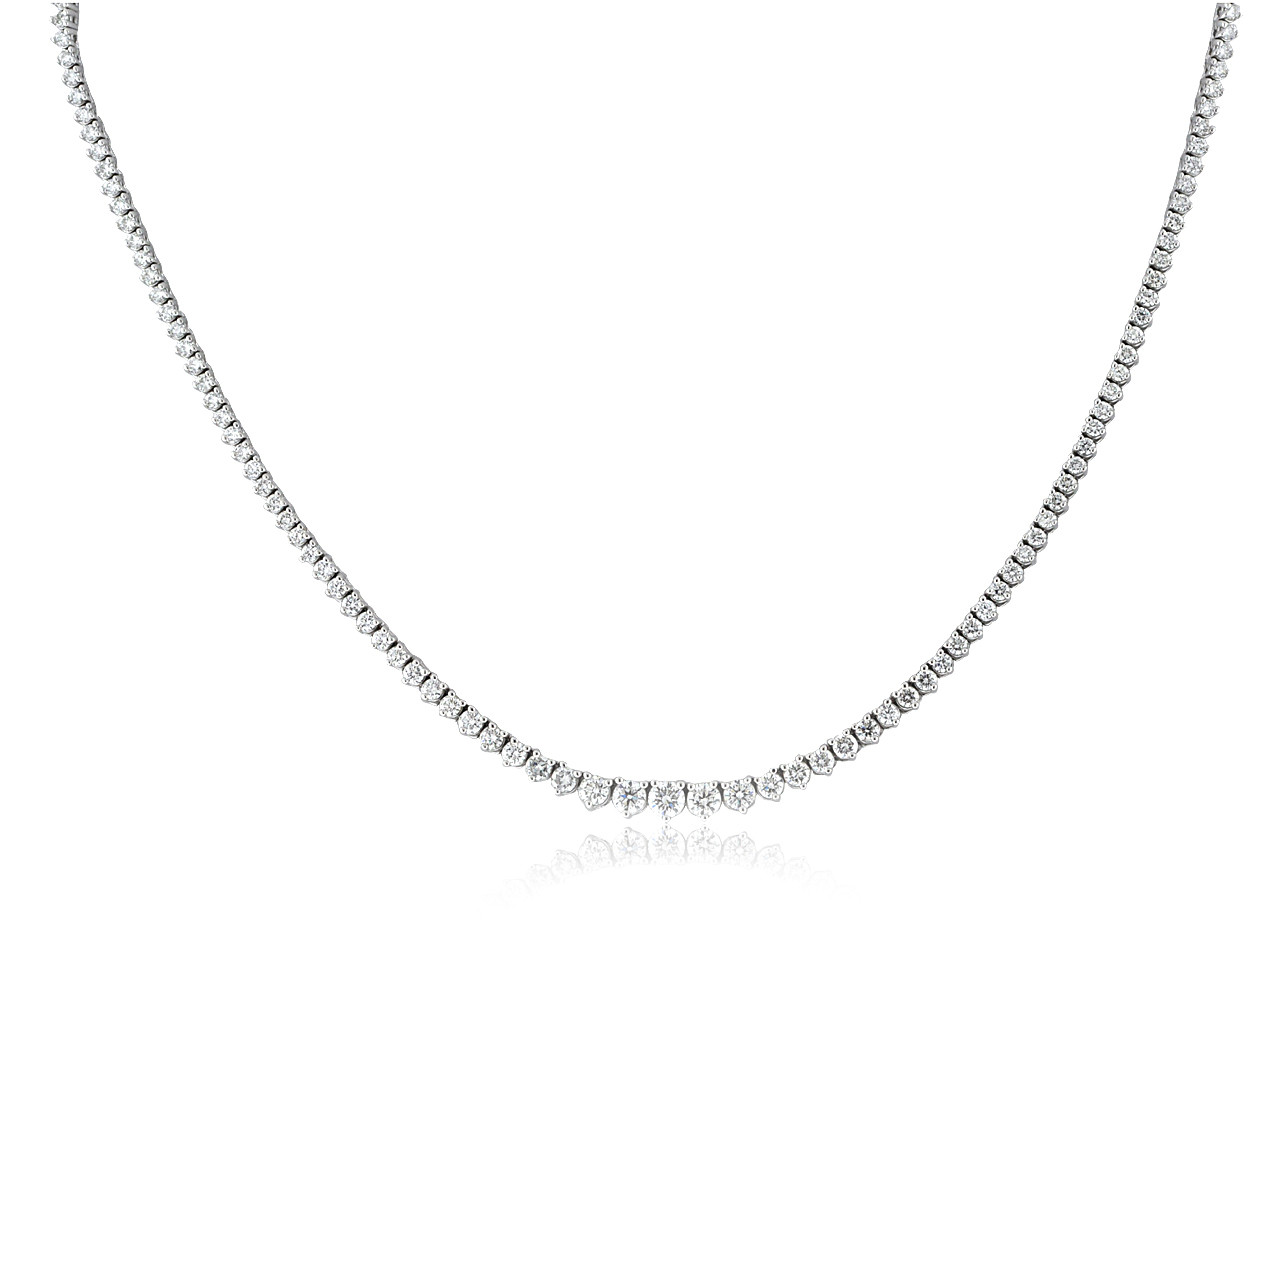 JFTS 925 Sterling Silver Natural Black Diamond Necklace 17 Inches - Ruby  Lane